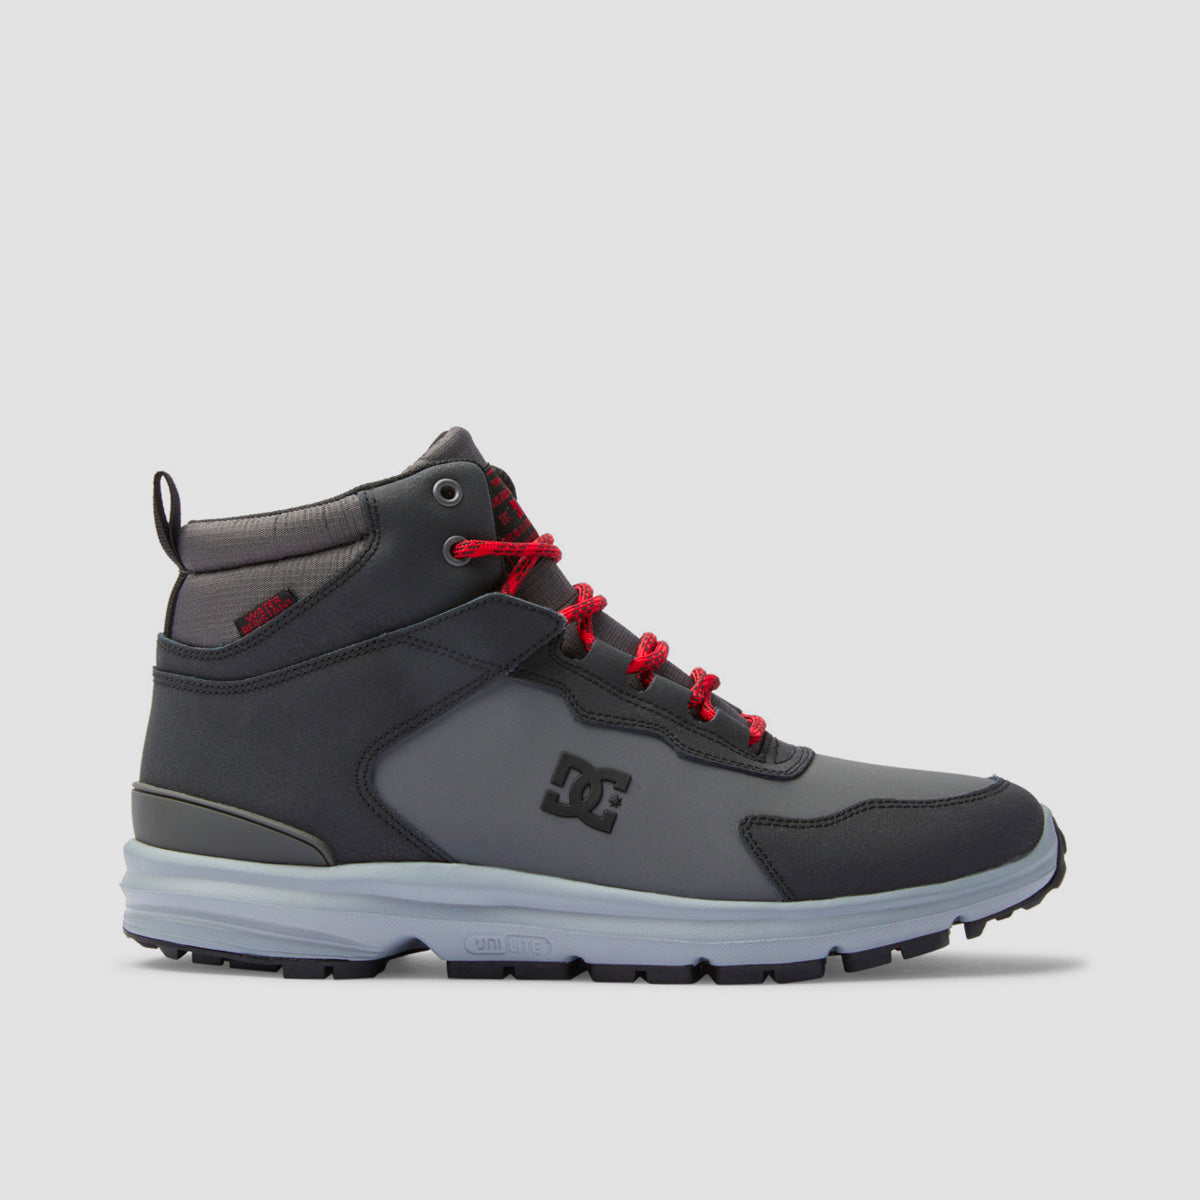 DC Mutiny WR Boots Grey/Black/Red